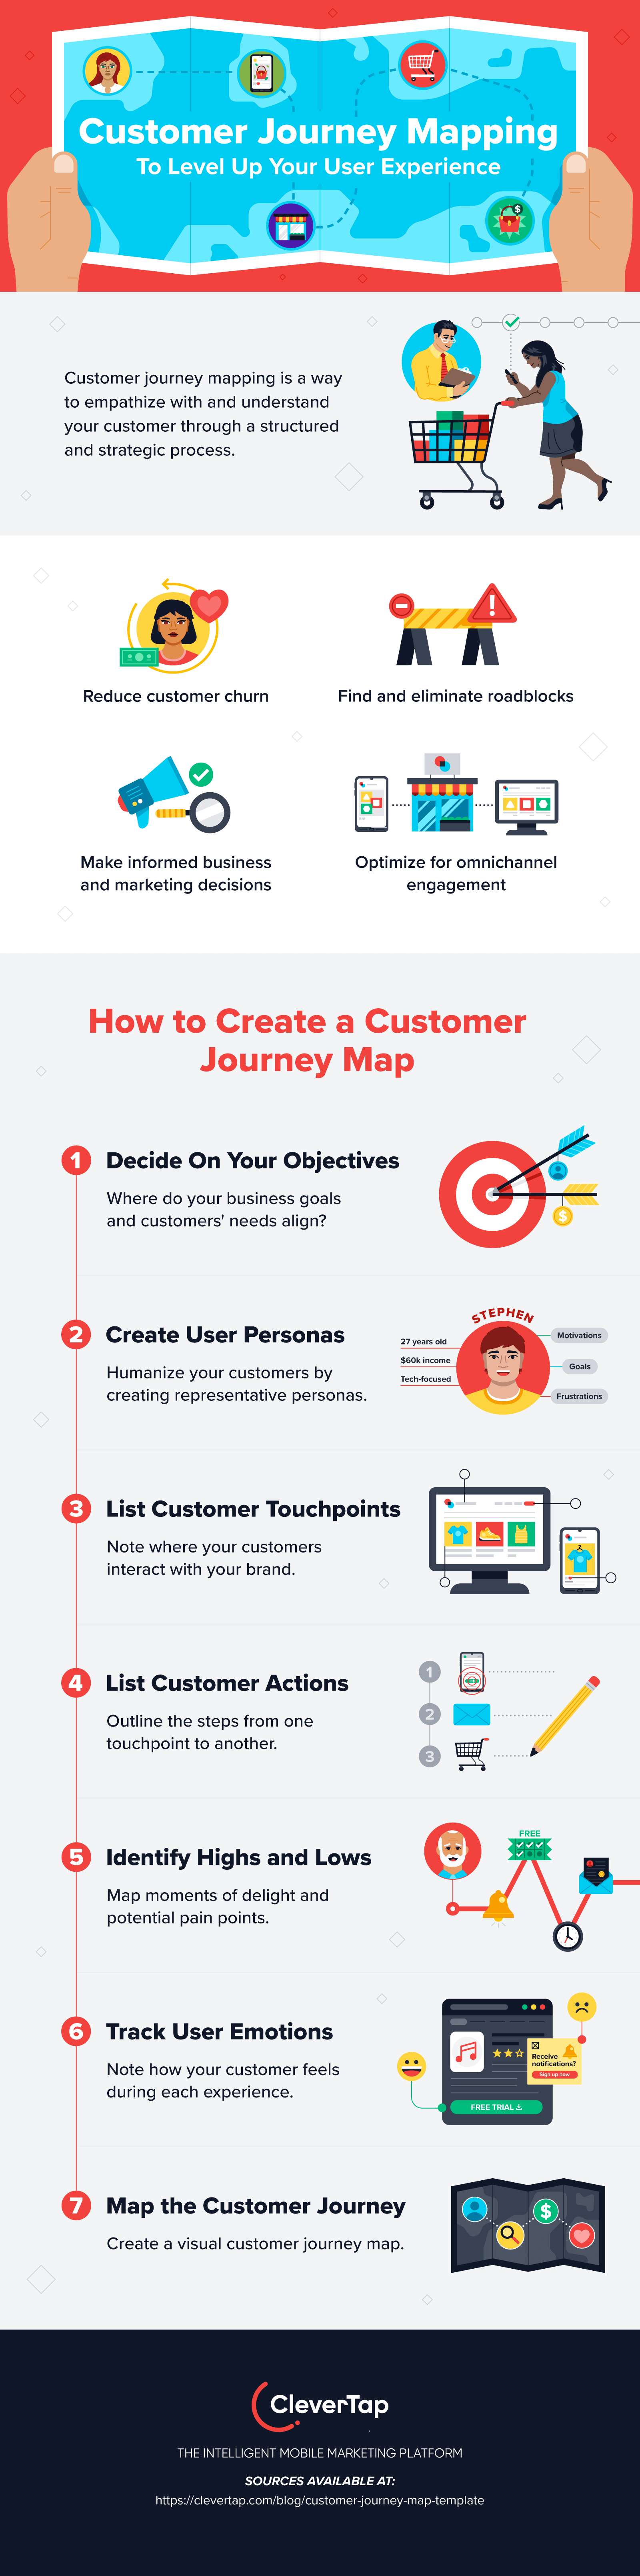 Infographic outlining how to create a Customer Journey Map 